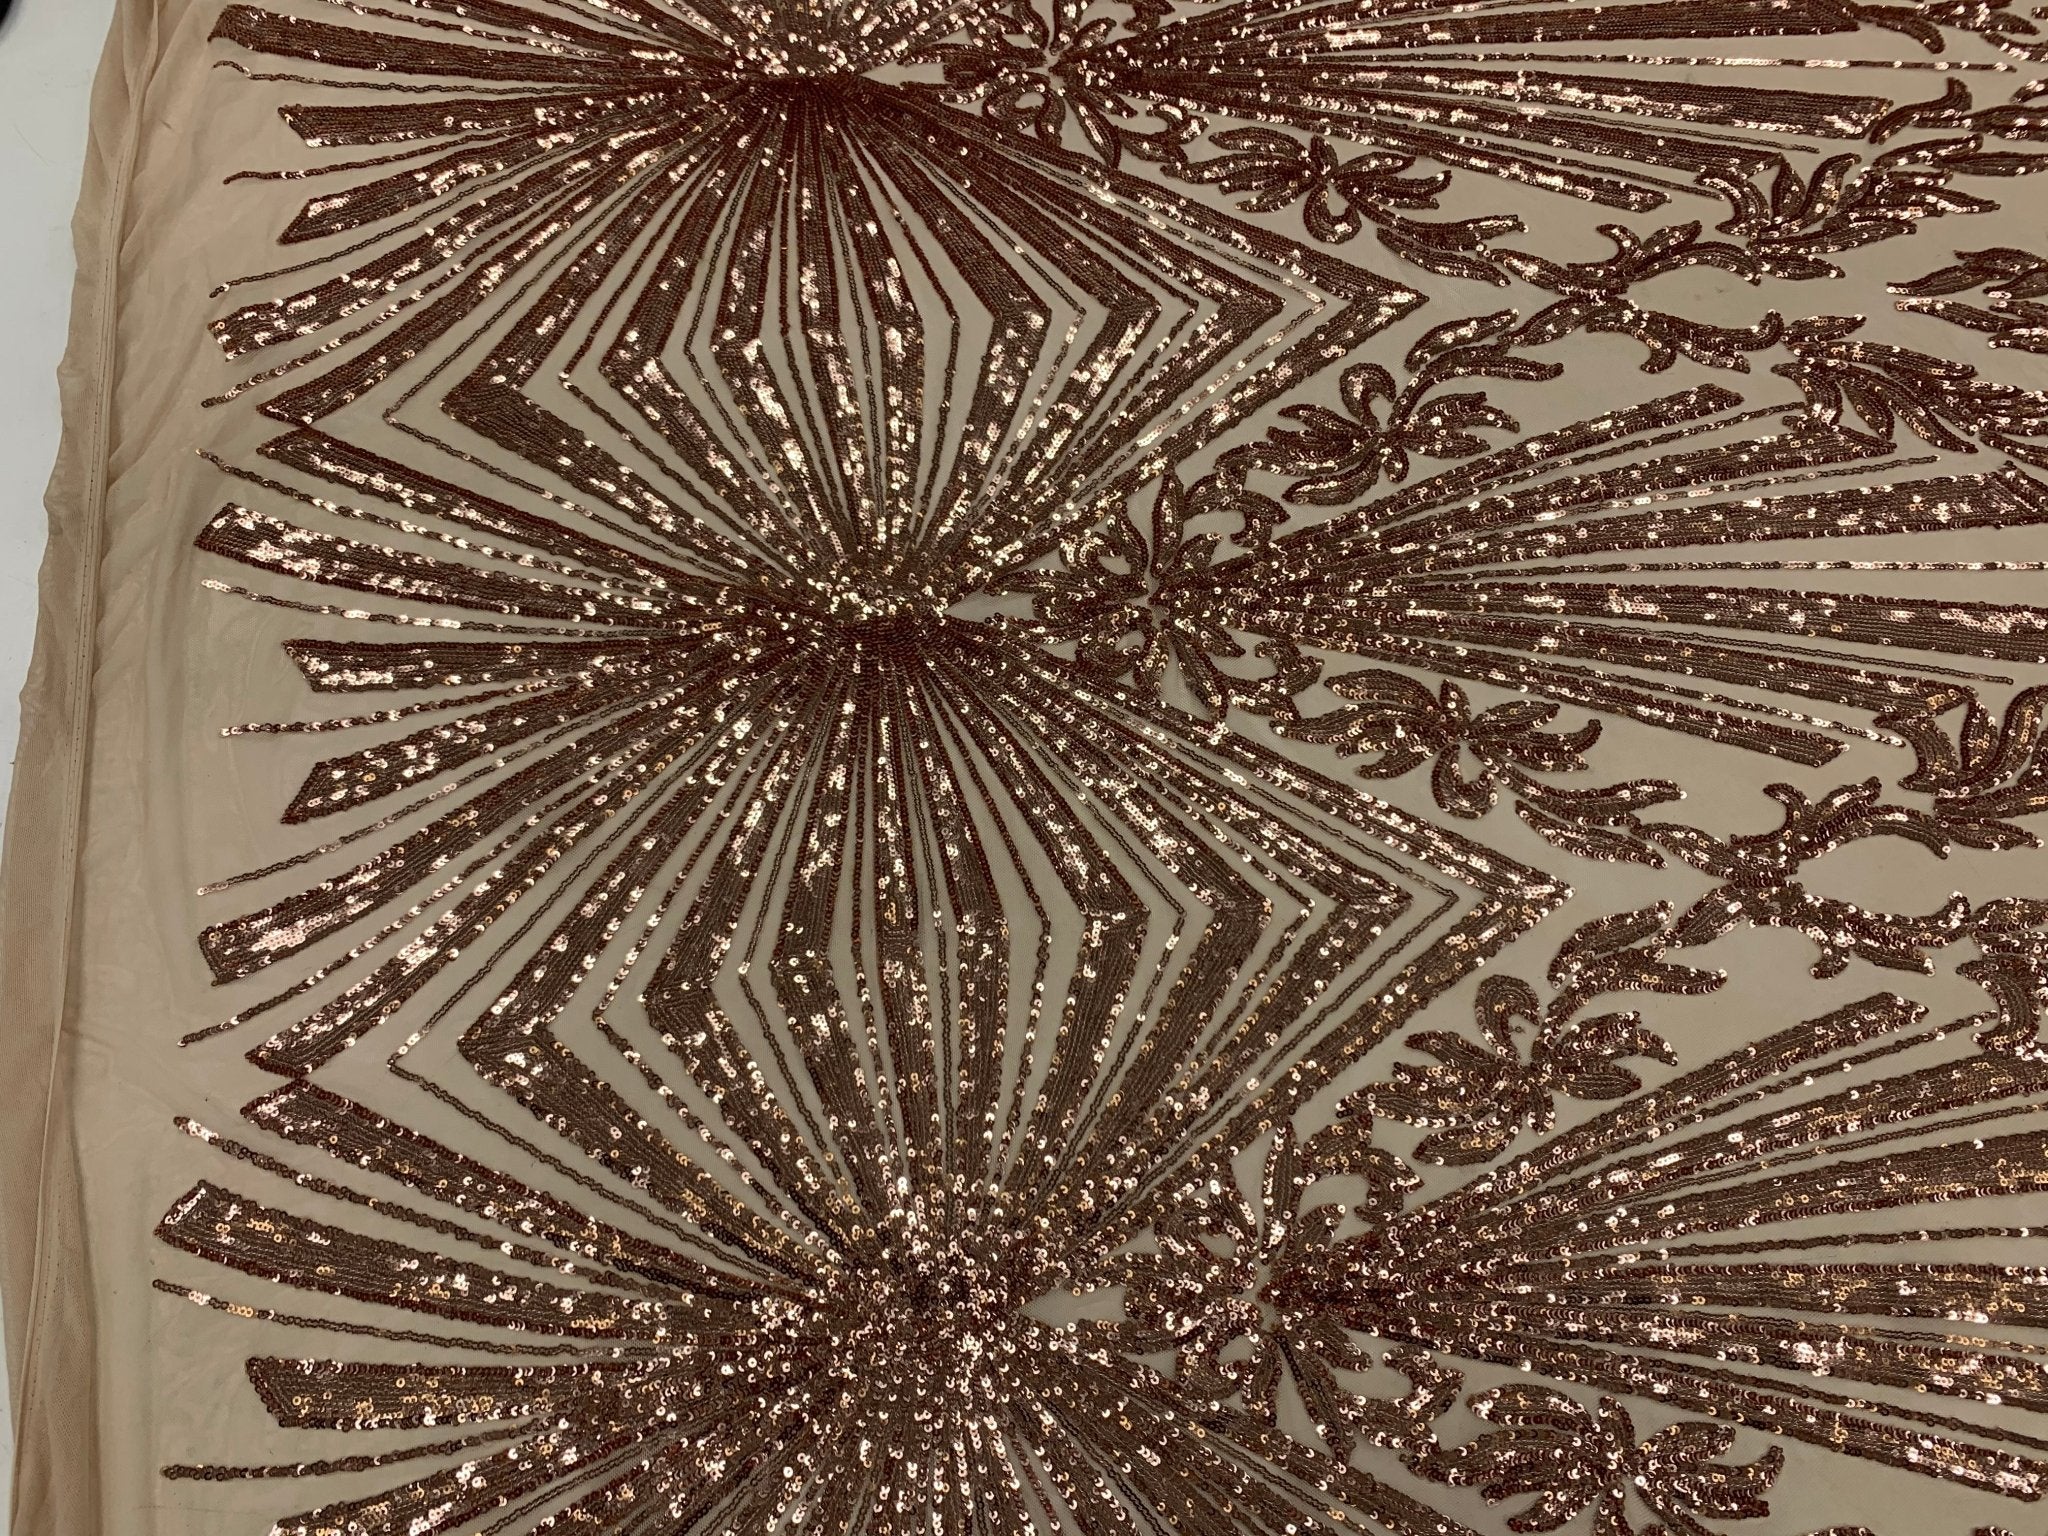 French Embroidery Stretch Sequins Fabric By The Yard on a Mesh LaceICEFABRICICE FABRICSRose GoldFrench Embroidery Stretch Sequins Fabric By The Yard on a Mesh Lace ICEFABRIC Rose Gold